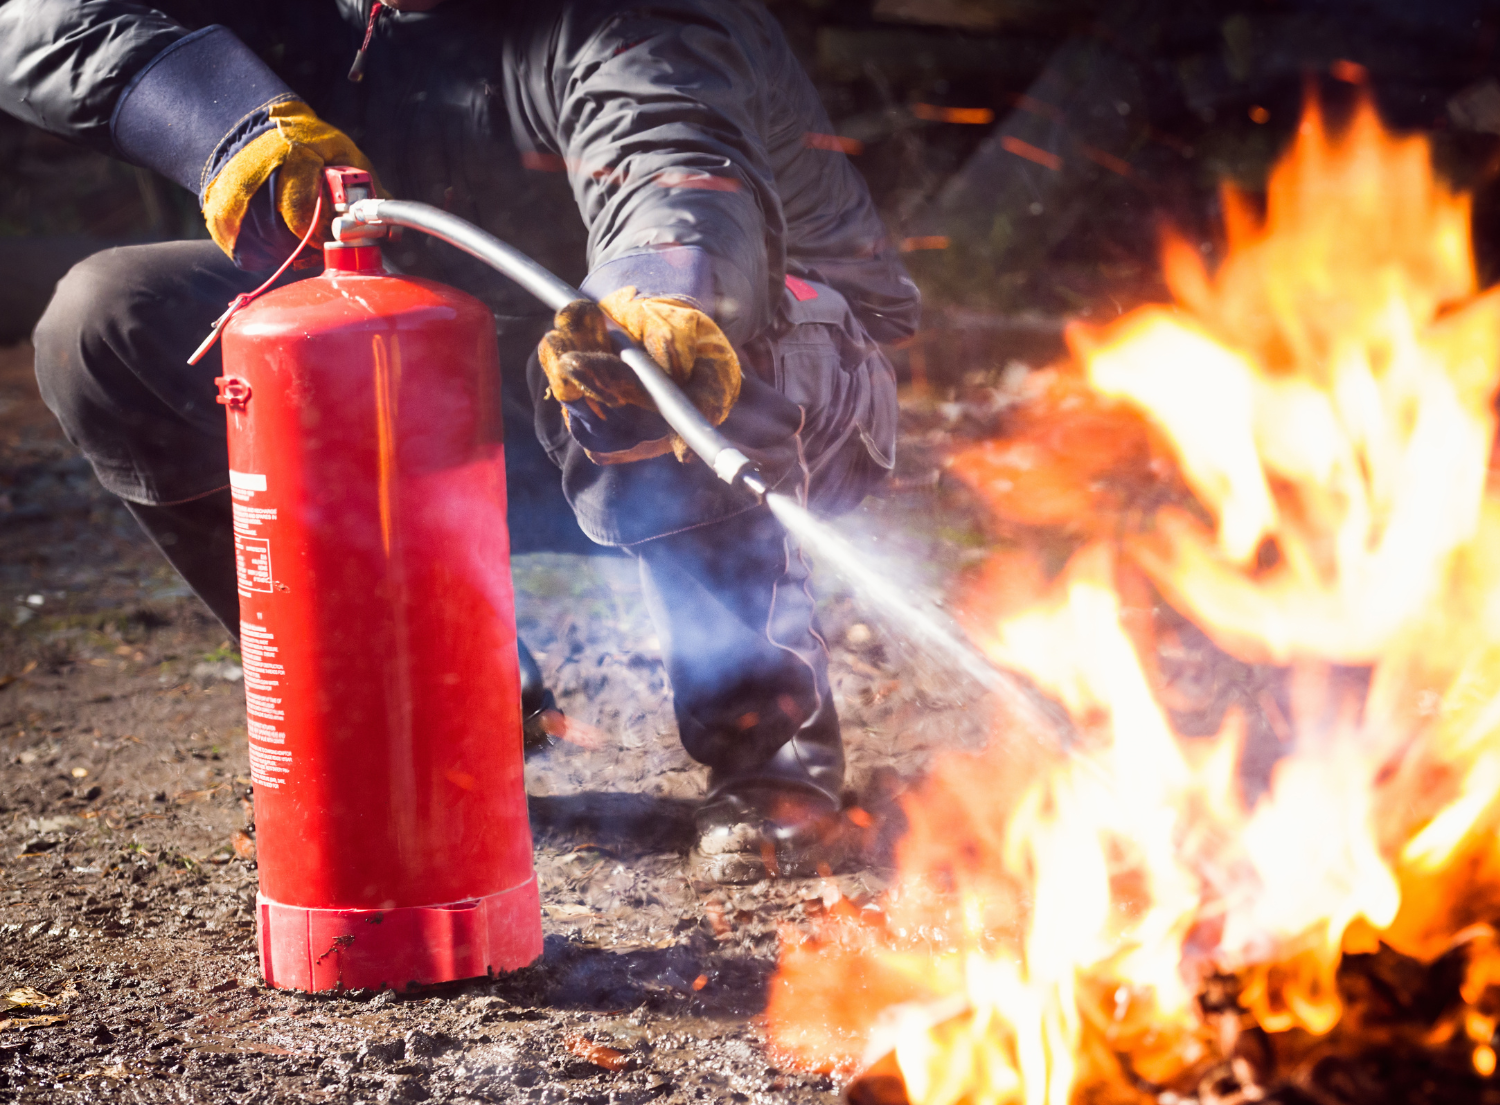 fireman putting out blazing fire with fire extinguisher